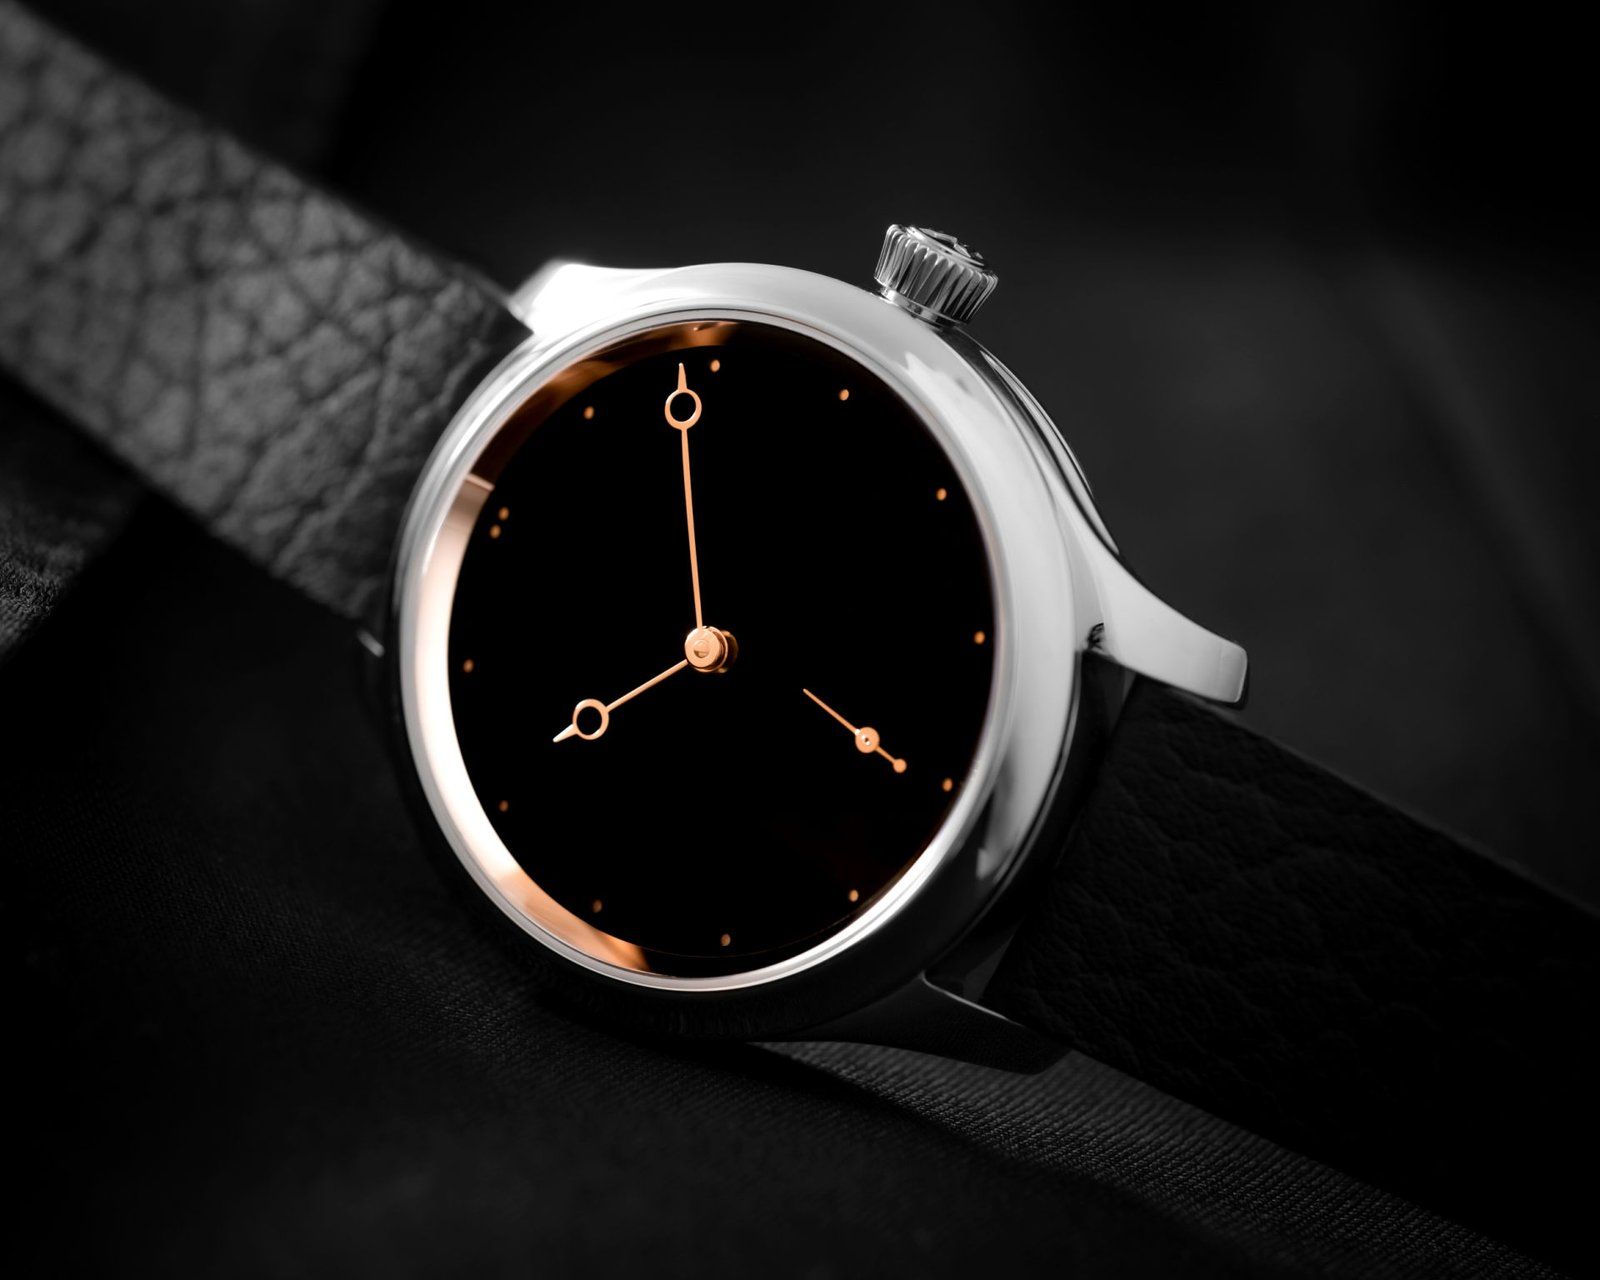 H. Moser & Cie - Endeavour Small Seconds Total Eclipse X The Armoury watch